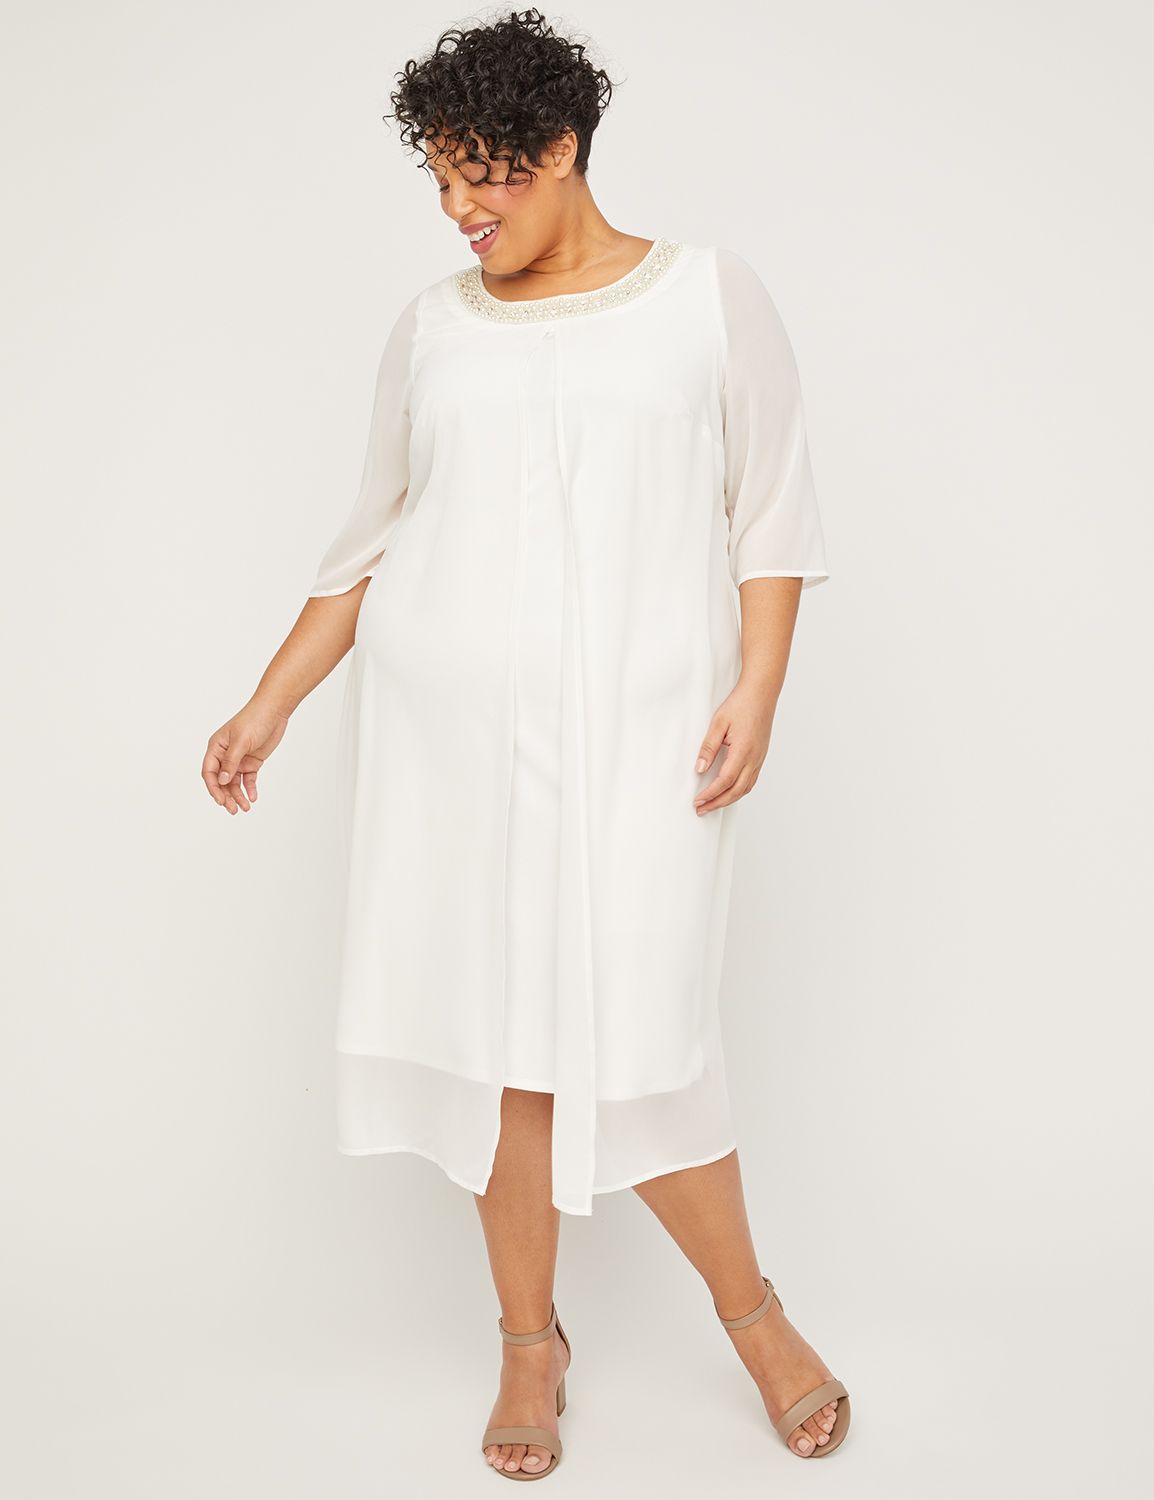 catherines plus size formal wear